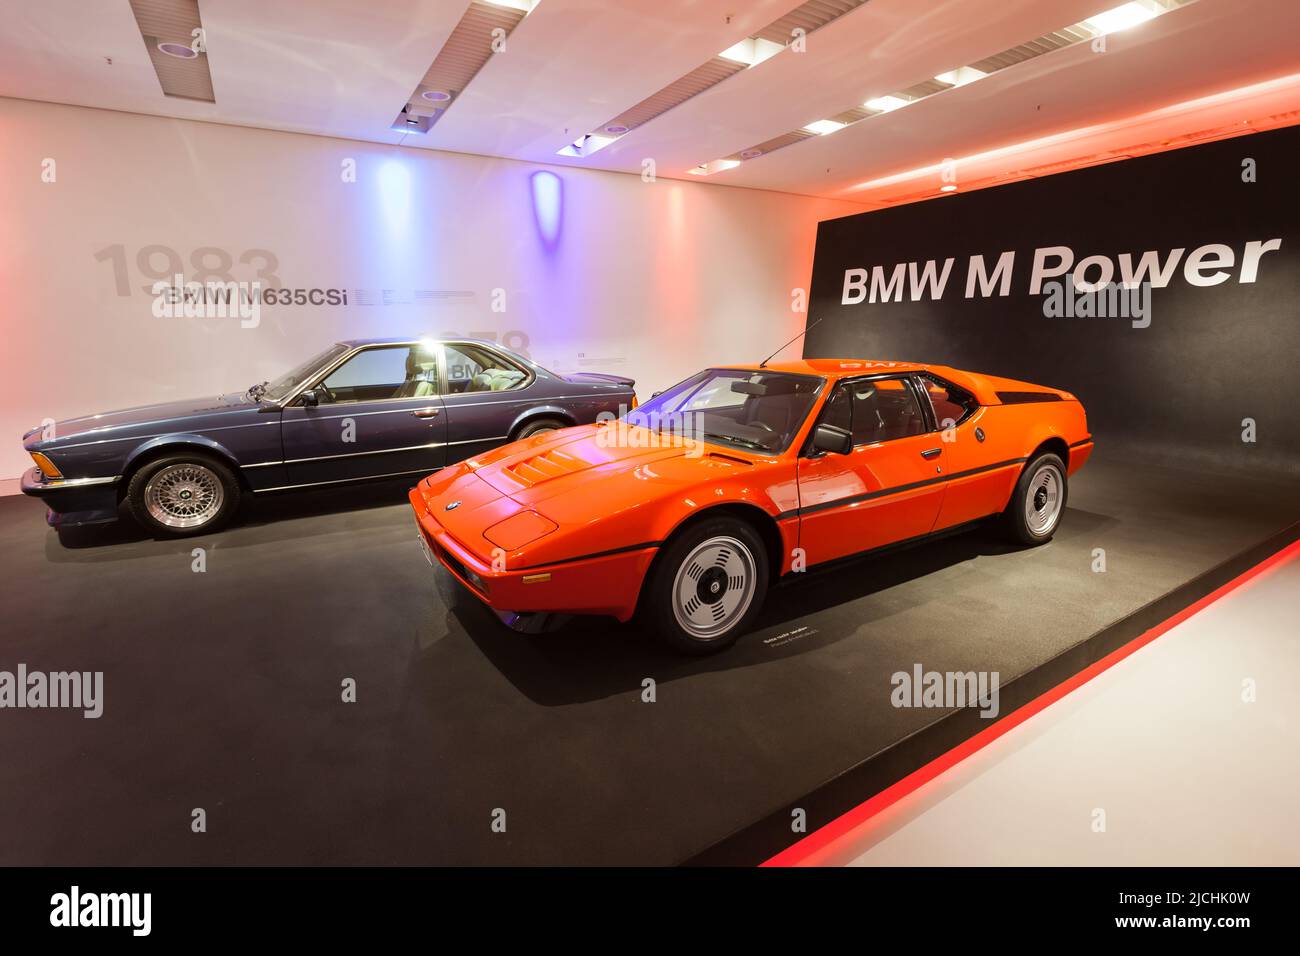 Munich, Germany - July 08, 2021: BMW M1 and M635CSi on display in BMW Museum, an automobile museum of BMW history located near the Olympiapark in Muni Stock Photo